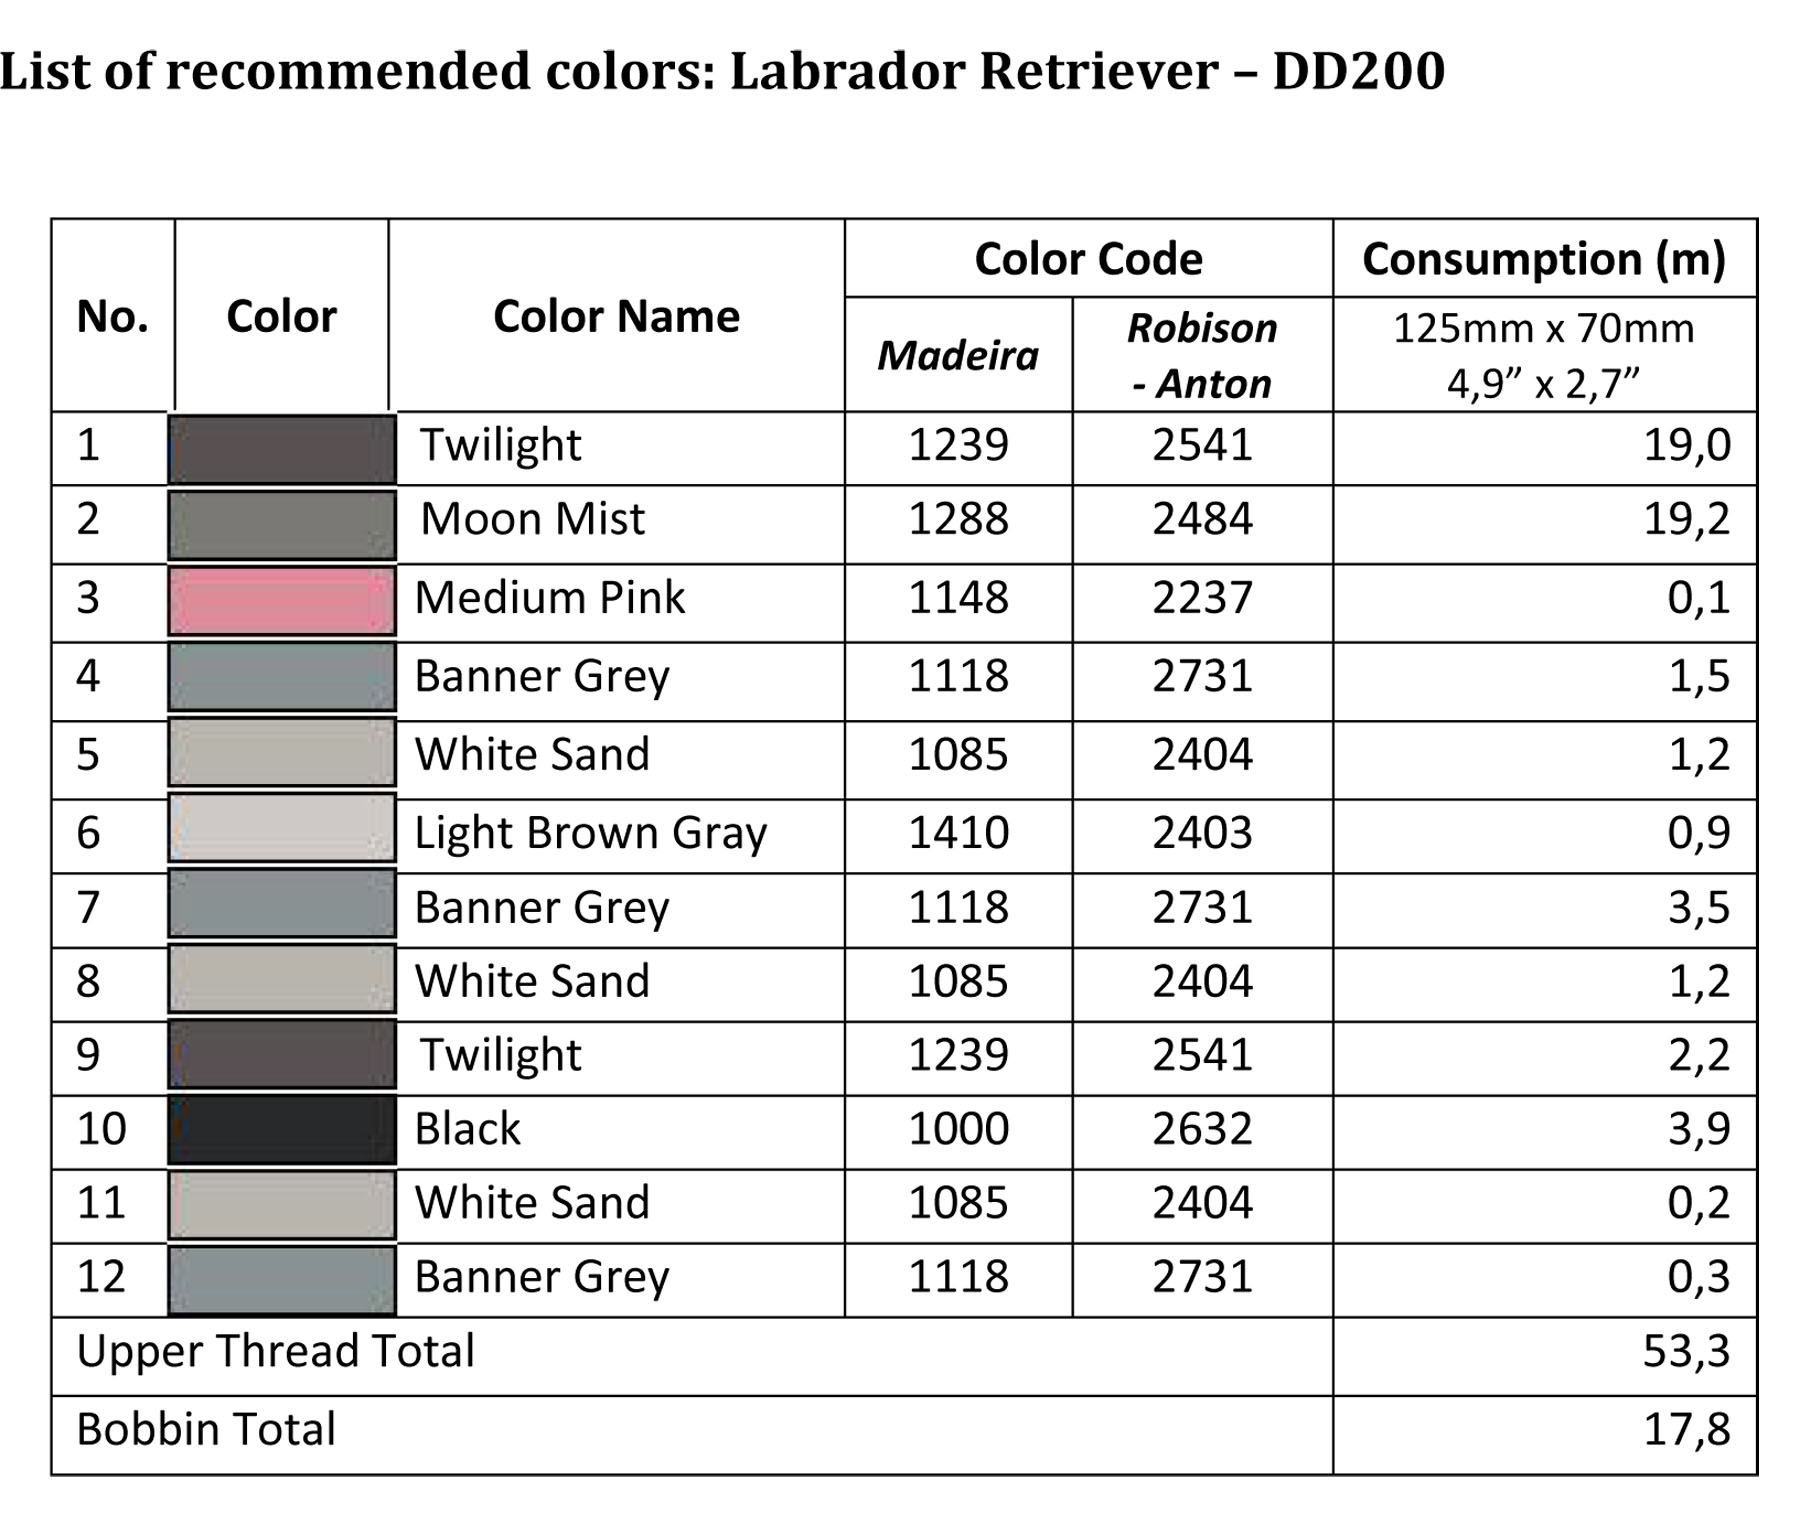 List of recommended colors - LargeDD200